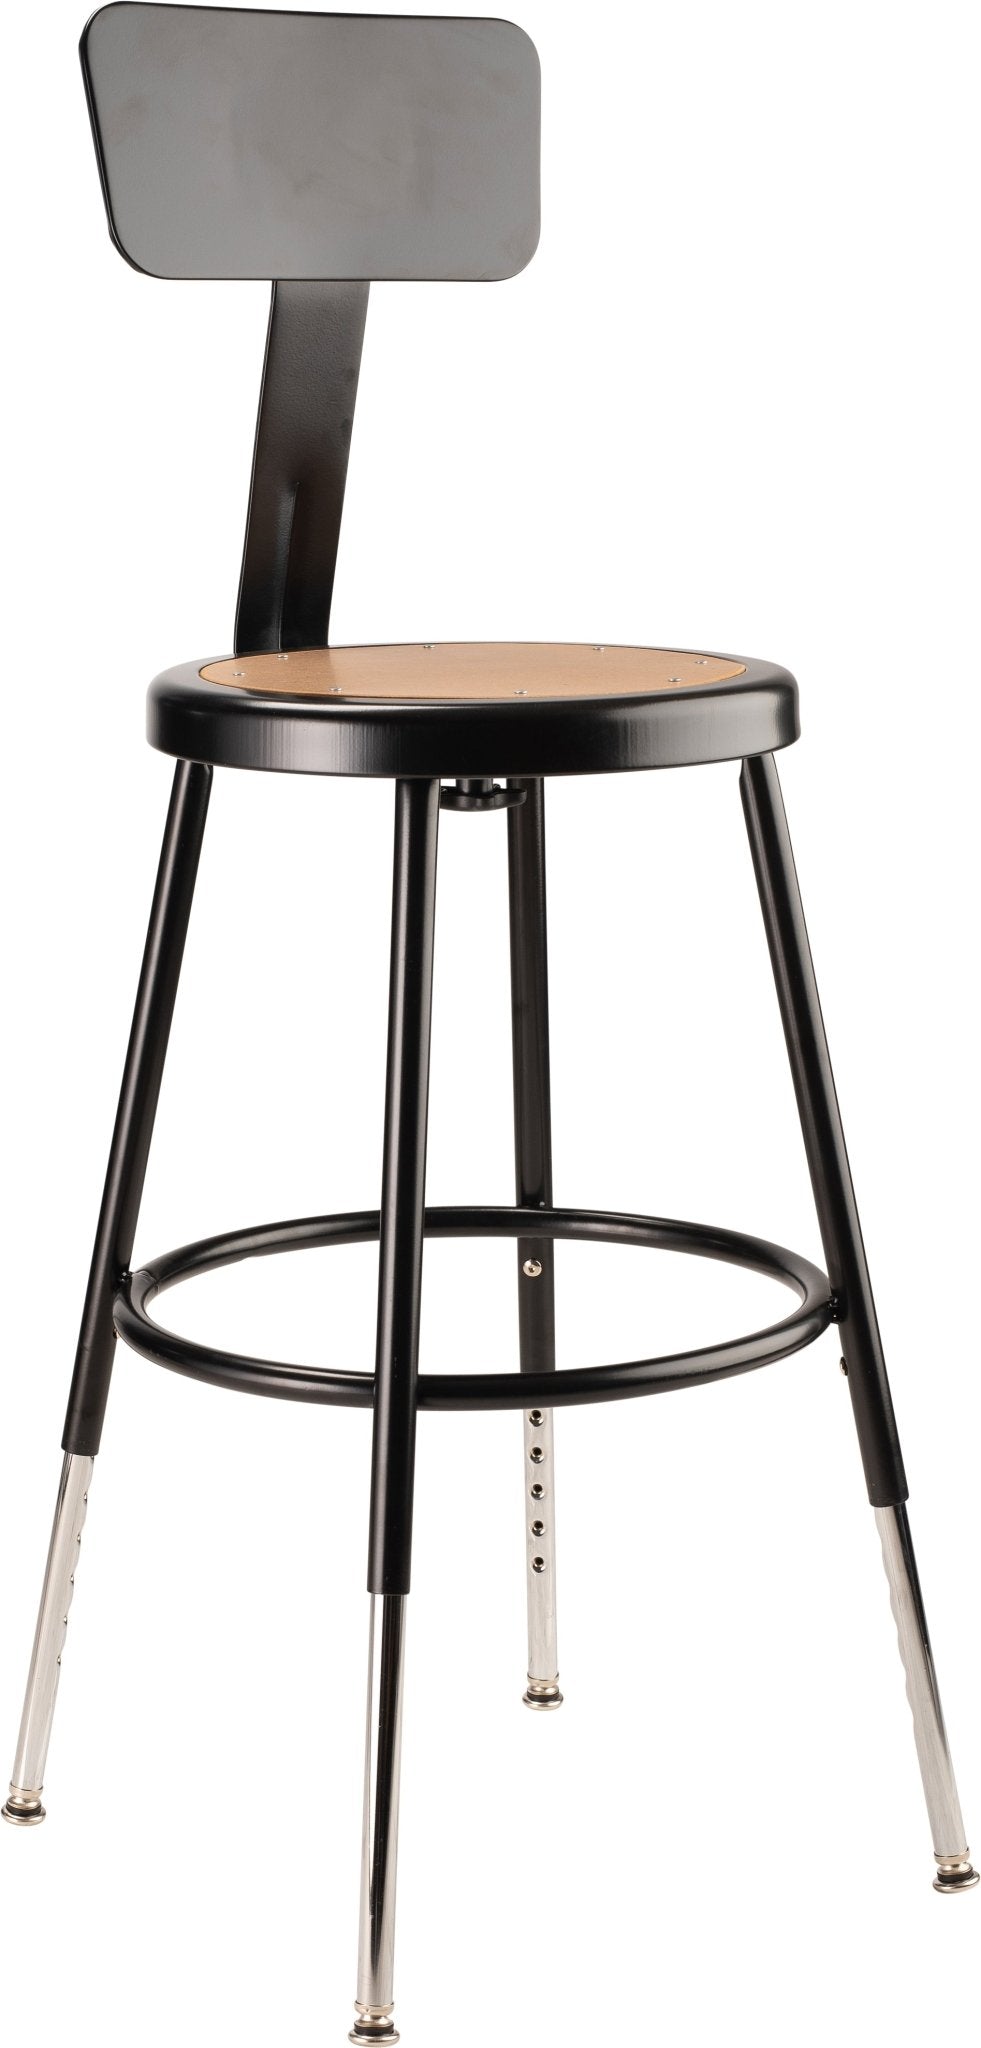 NPS 18.5 - 26.5" H Height Adjustable Heavy Duty Steel Stool with Backrest (National Public Seating NPS-6218HB) - SchoolOutlet